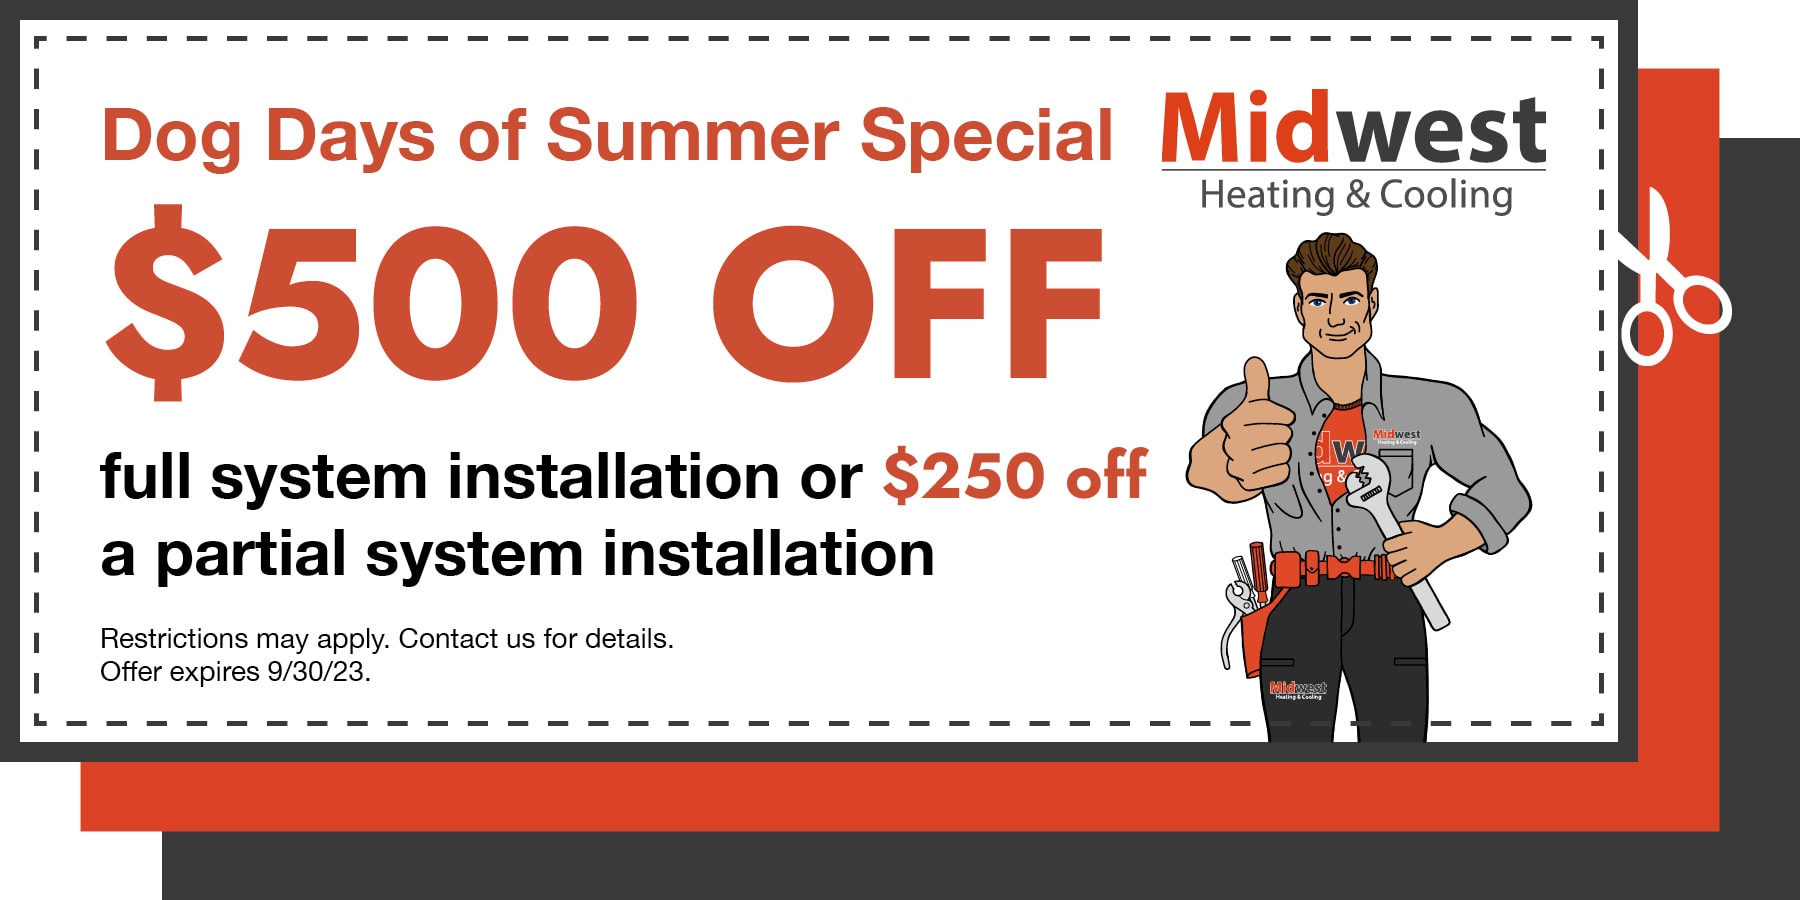 Dog days of summer special! 0 off a full system installation or 0 off a partial system installation. Restrictions may apply. Offer expires 9/30/2023. Contact us for details.